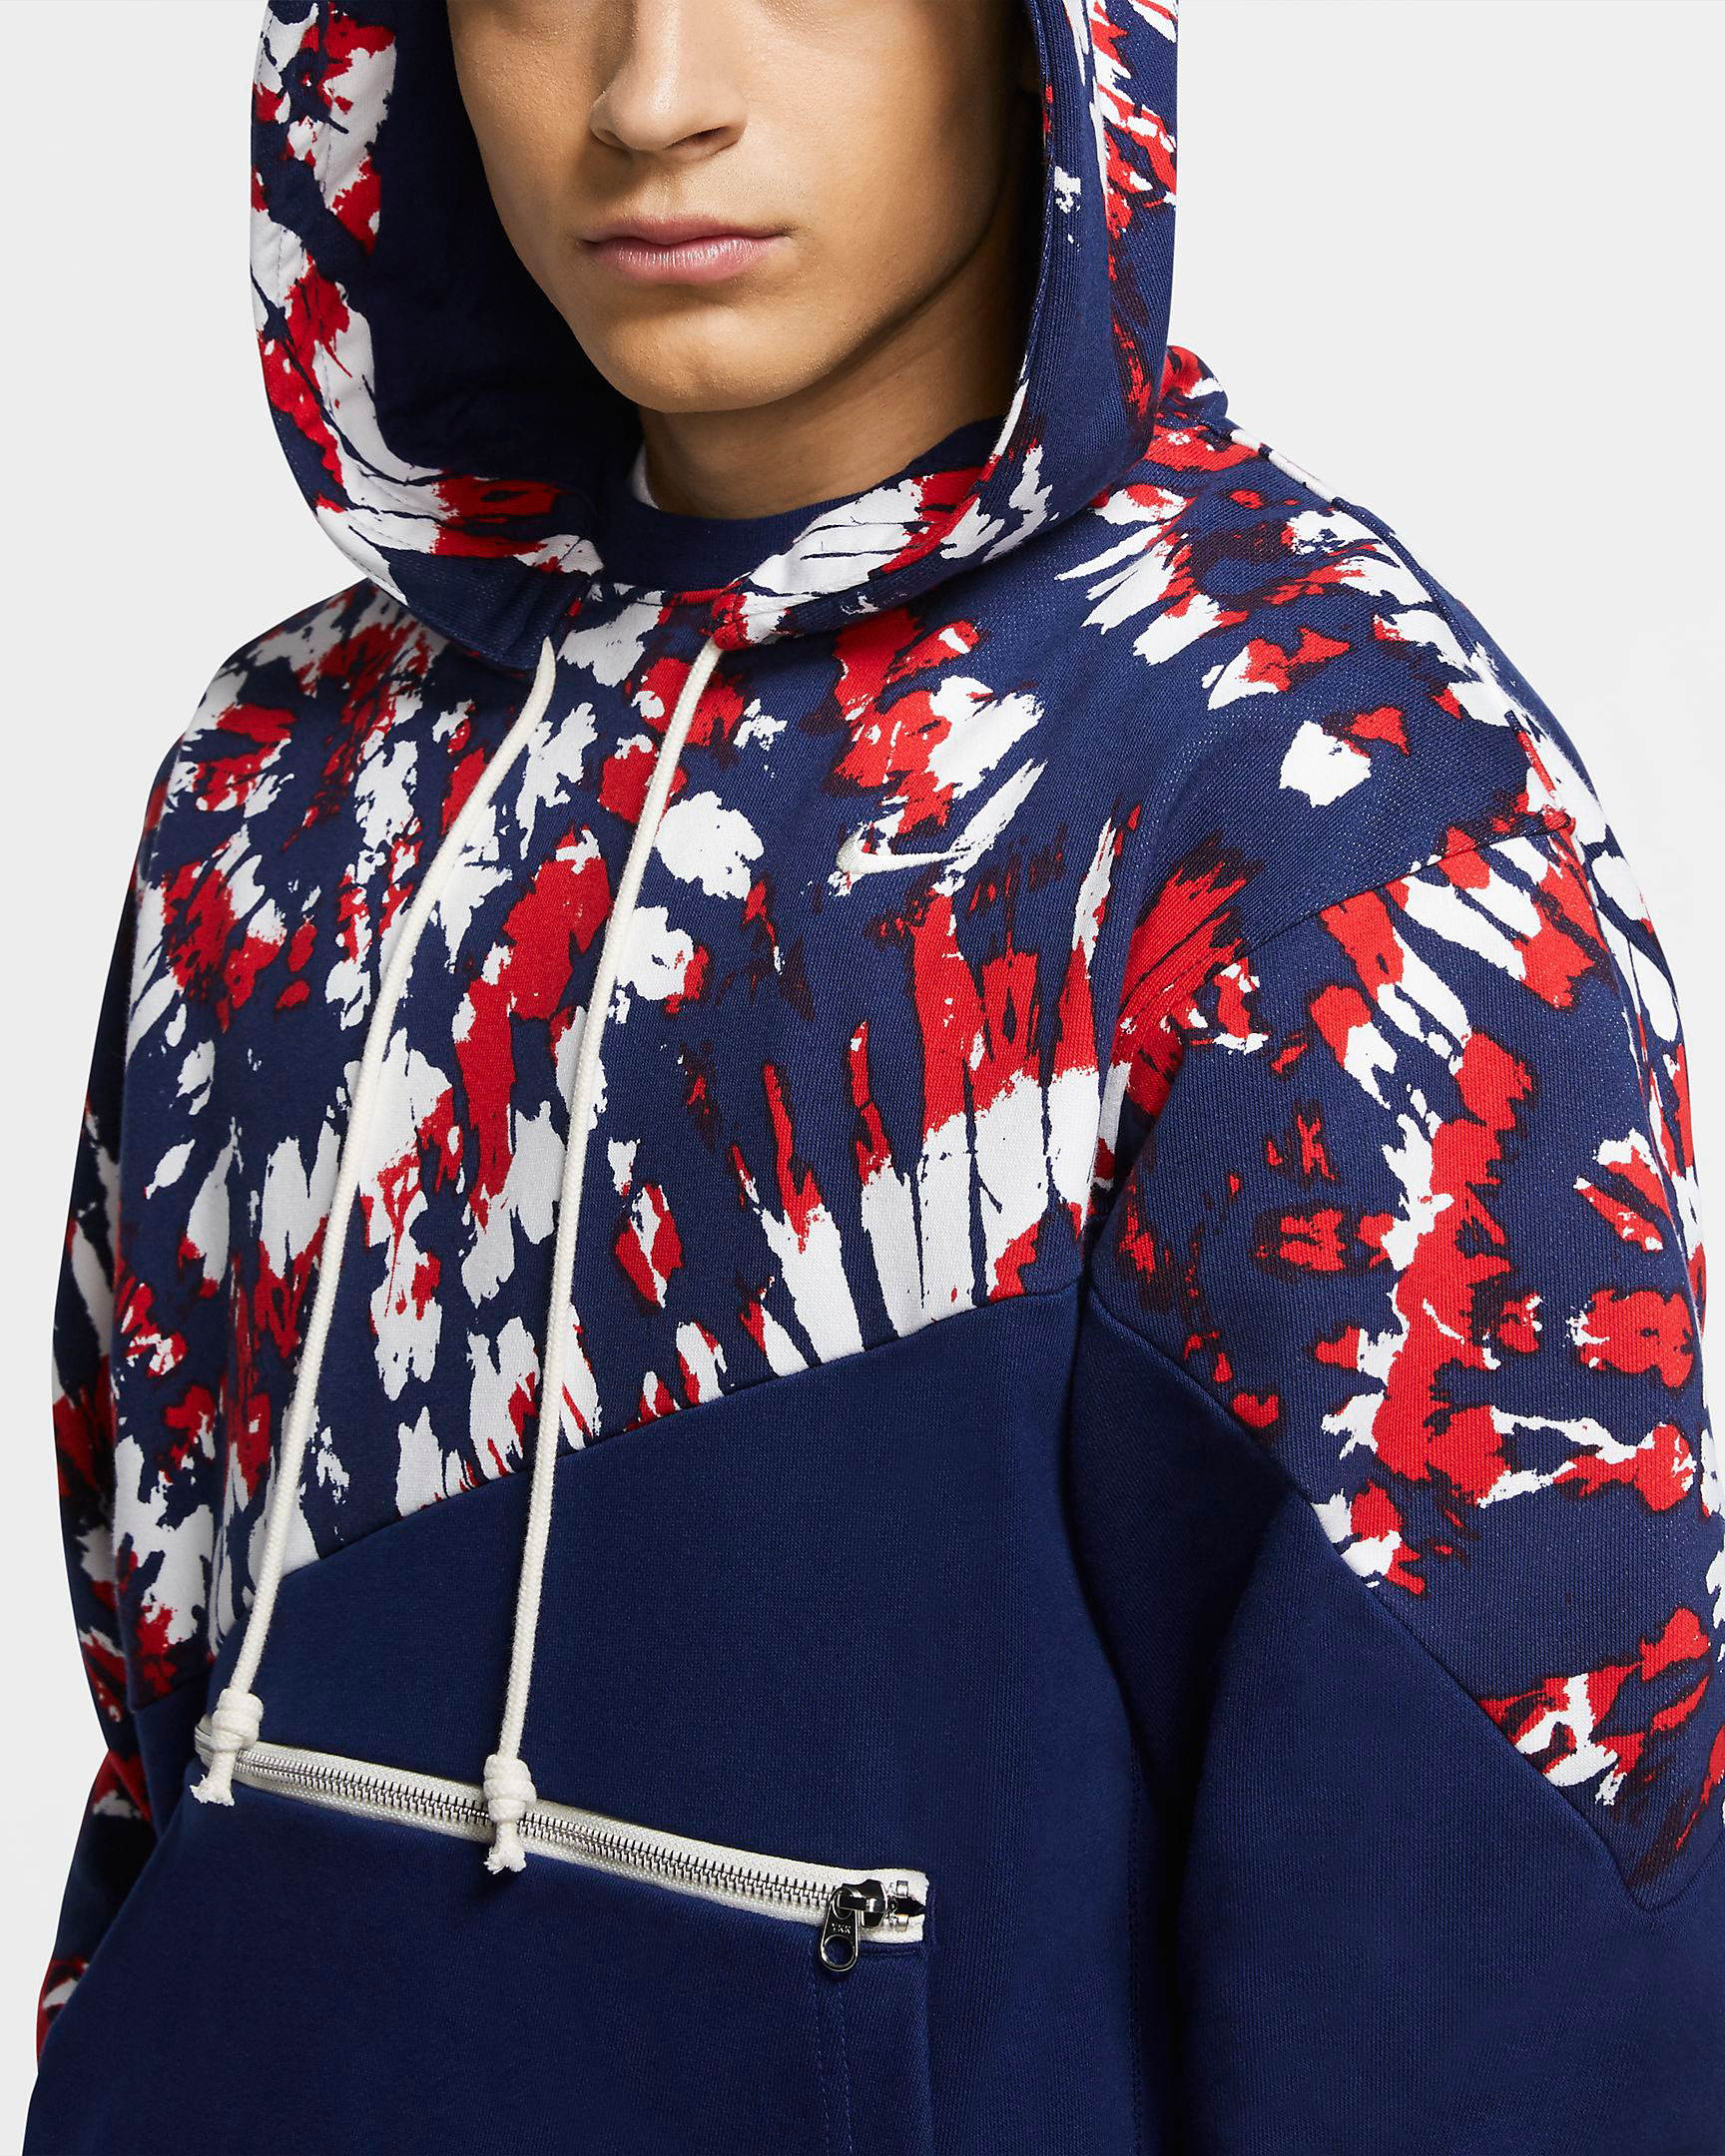 nike-kybrid-s2-what-the-usa-hoodie-1